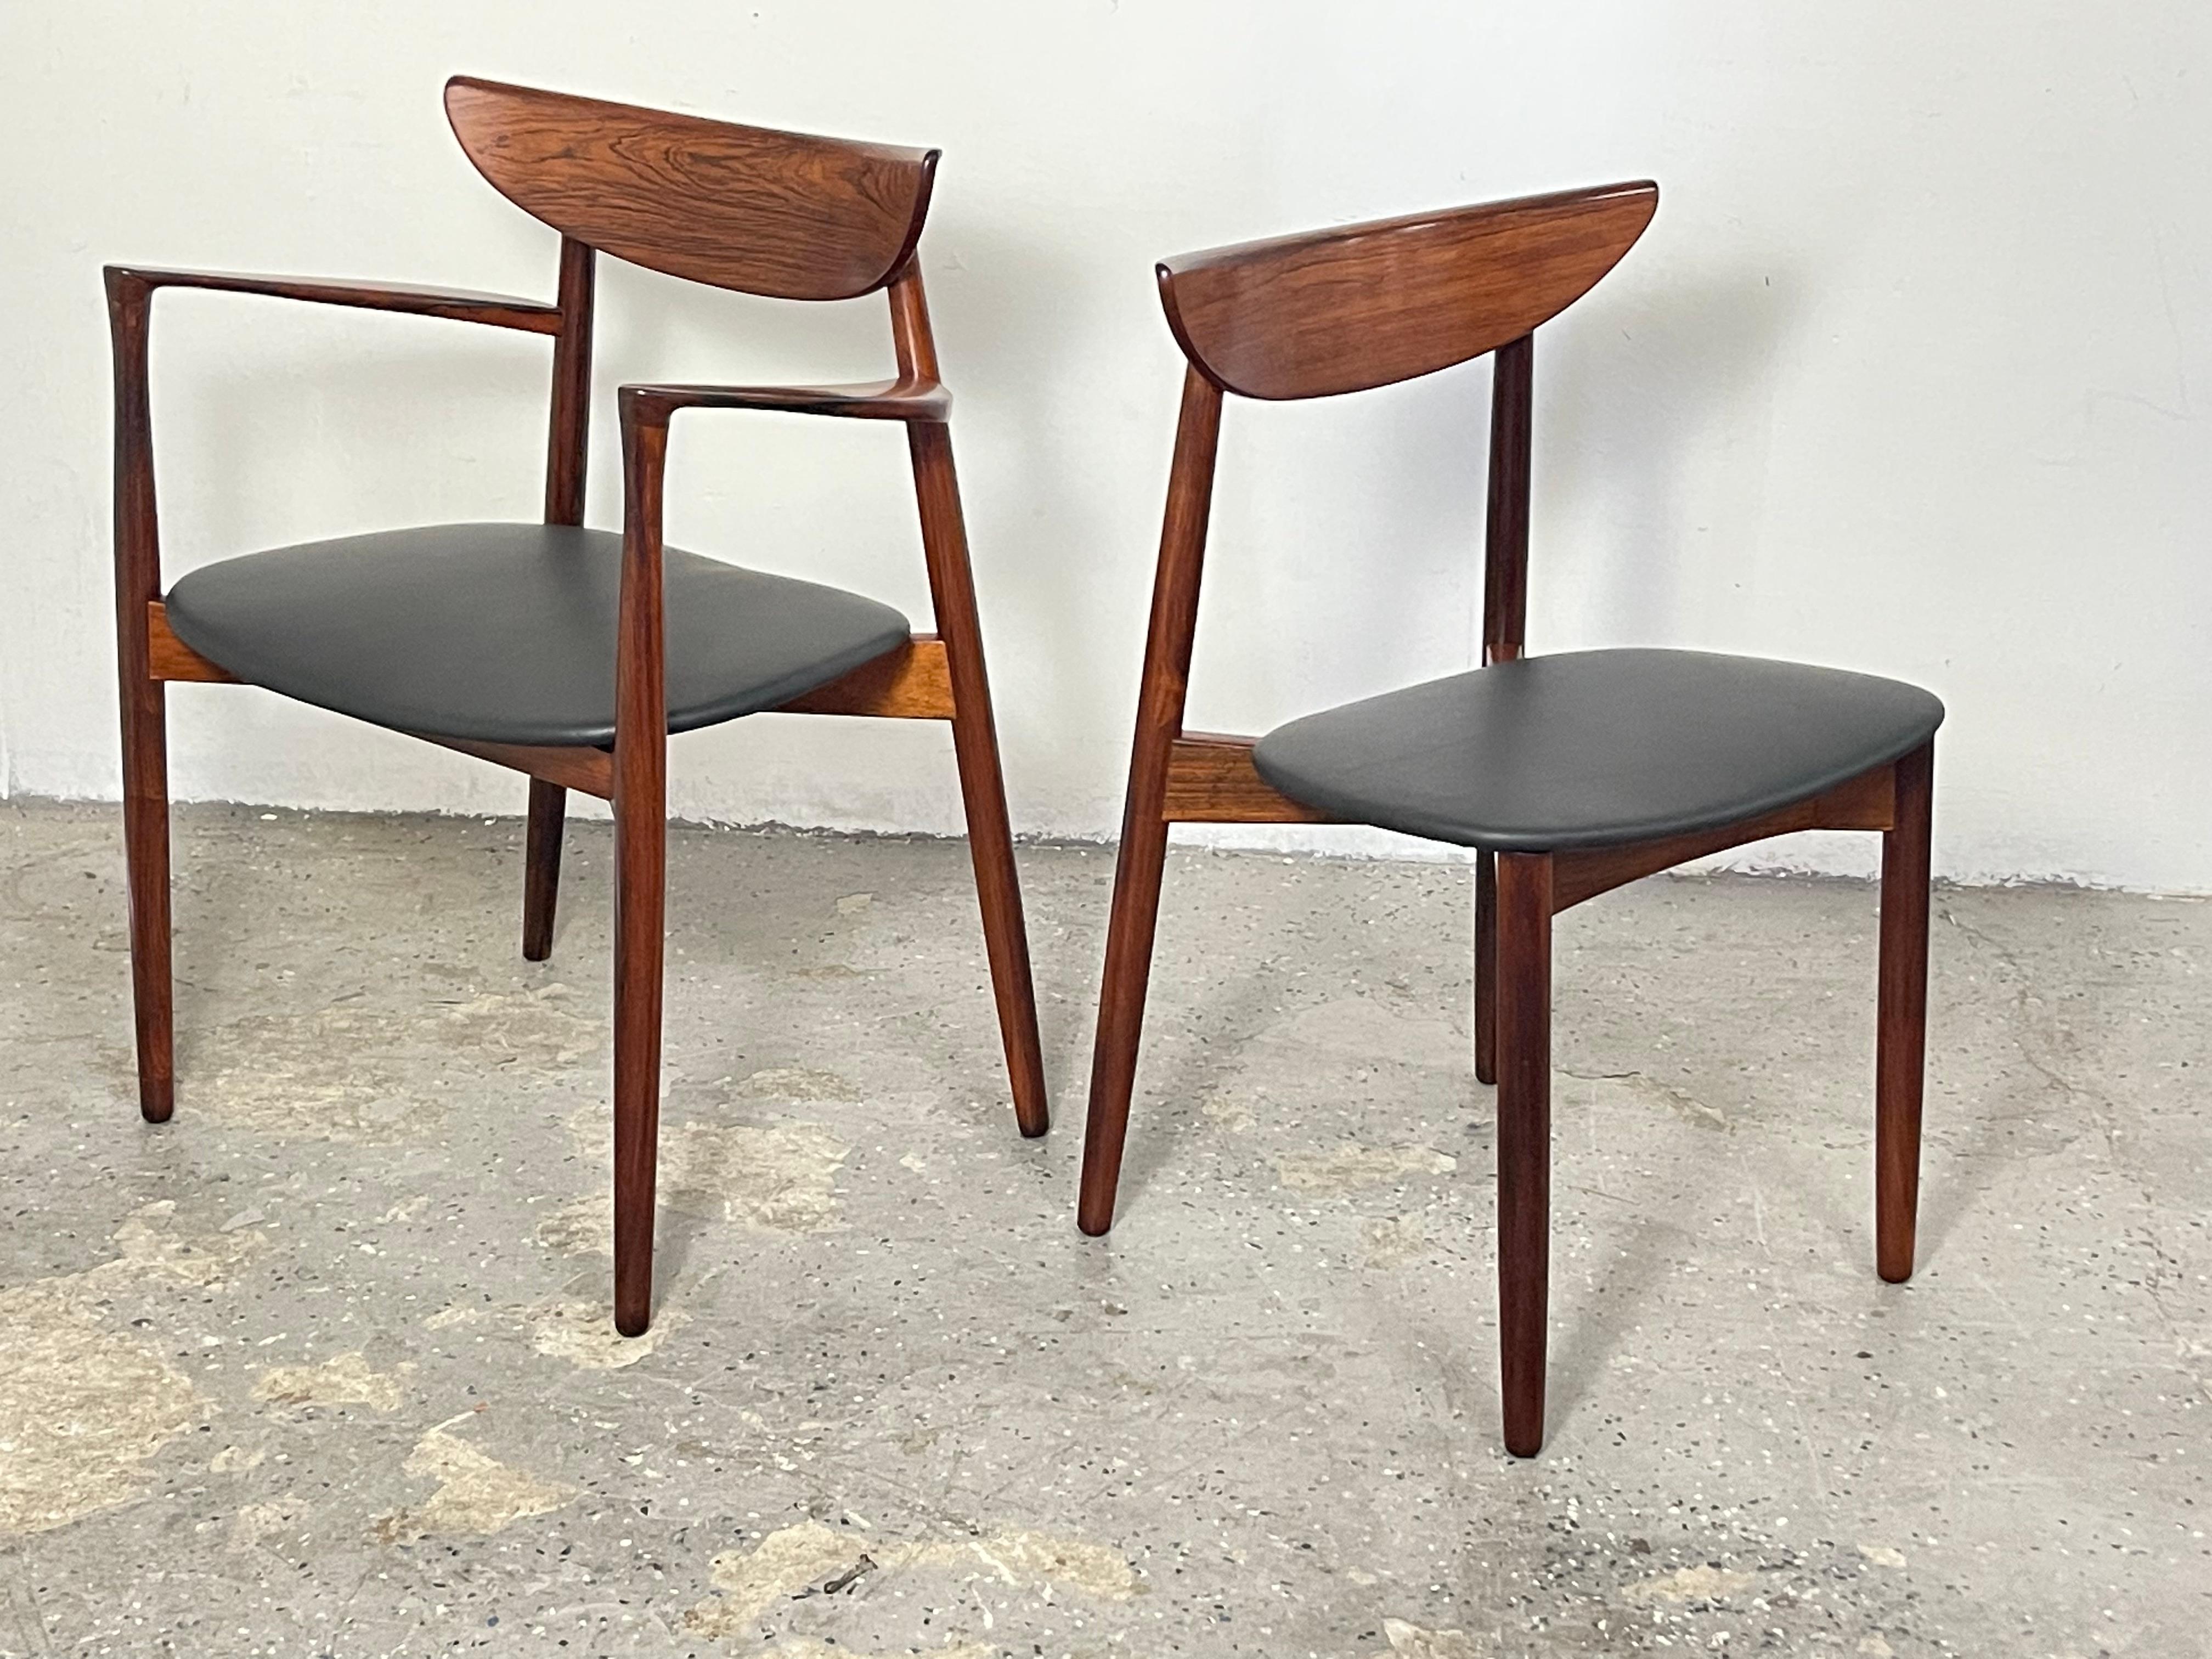 Set of 8 beautiful and sleek Solid Rosewood dining chairs by one of the Danish great designers Harry Ostergaard Manufactured by Moreddi of Denmark. Featuring graceful lines with a rounded curved back and tapered legs. Similar to Hans Wegner and Finn